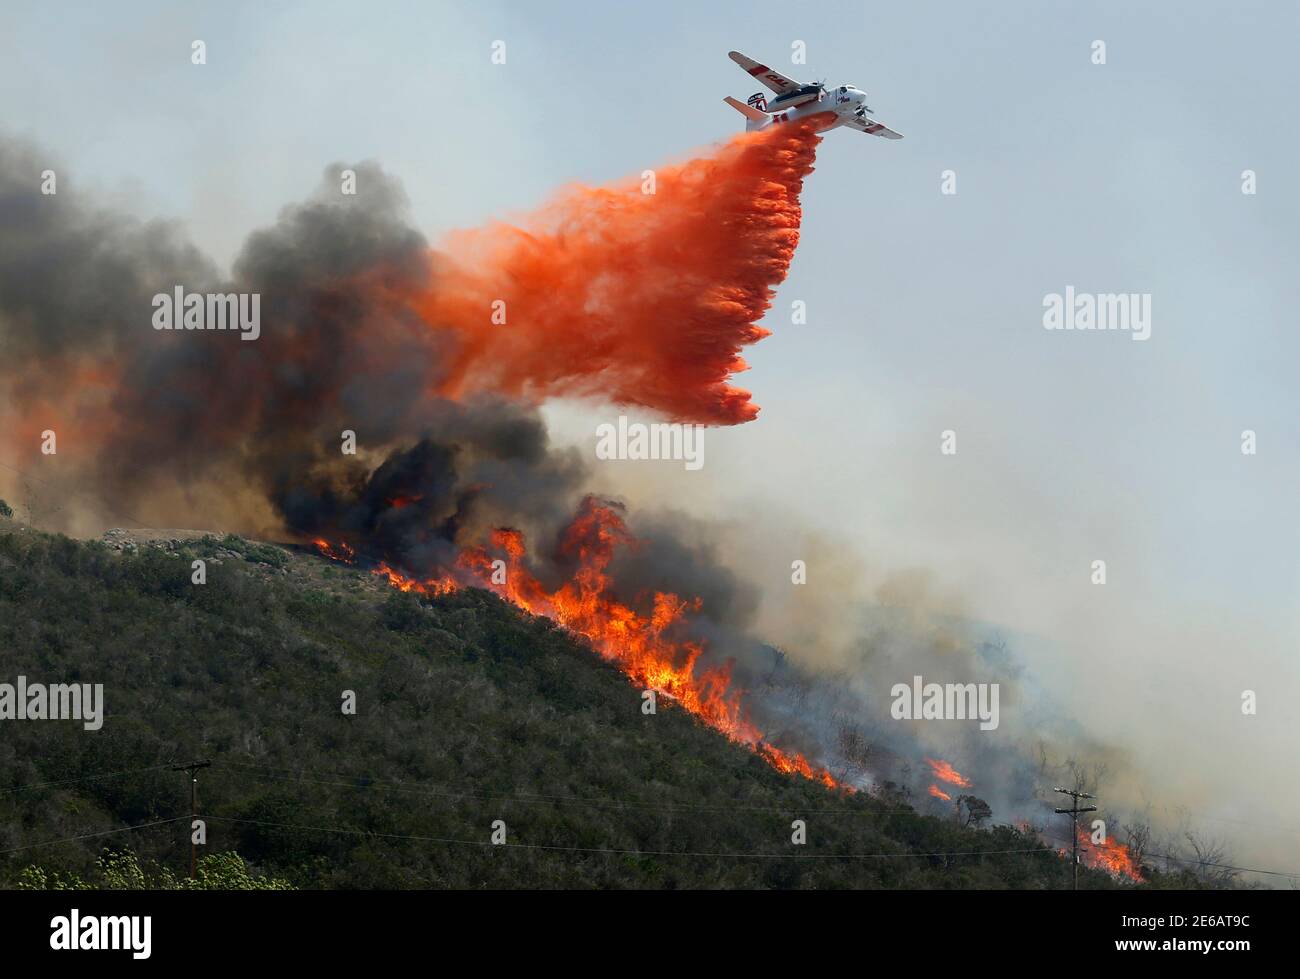 A water bomber makes a drop on flames burning on a hillside as the Cocos Fire continues in San Marcos, California May 15, 2014. Wildfires were raging in southern California on Thursday, keeping thousands of residents and students away from their homes after San Diego county officials maintained evacuation advisories. REUTERS/Mike Blake    (UNITED STATES - Tags: ENVIRONMENT DISASTER) Stock Photo